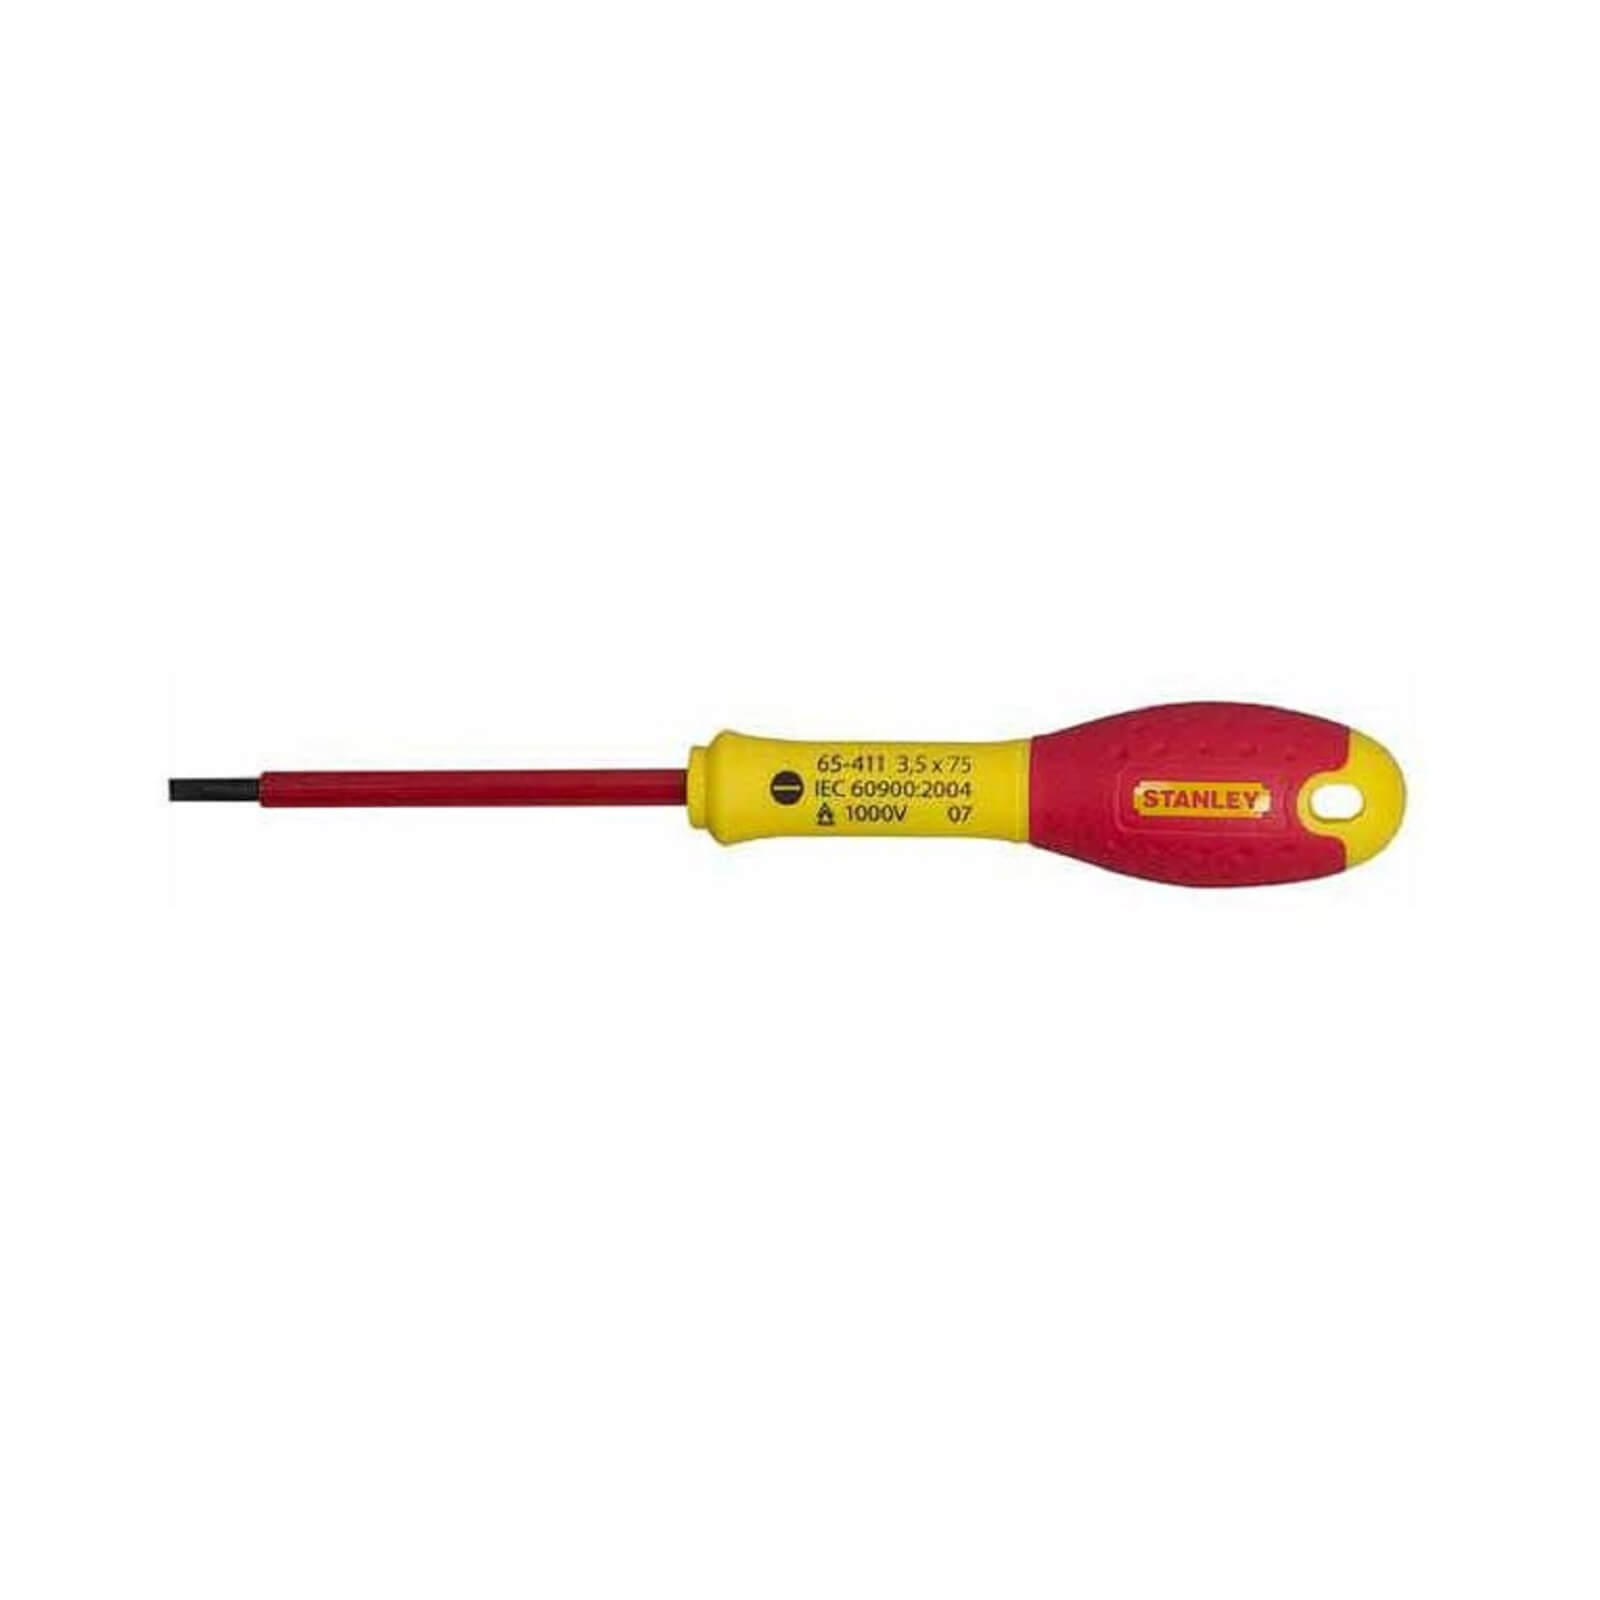 Photo of Stanley Fatmax Slotted Insulated Screwdriver - 3.5x75mm